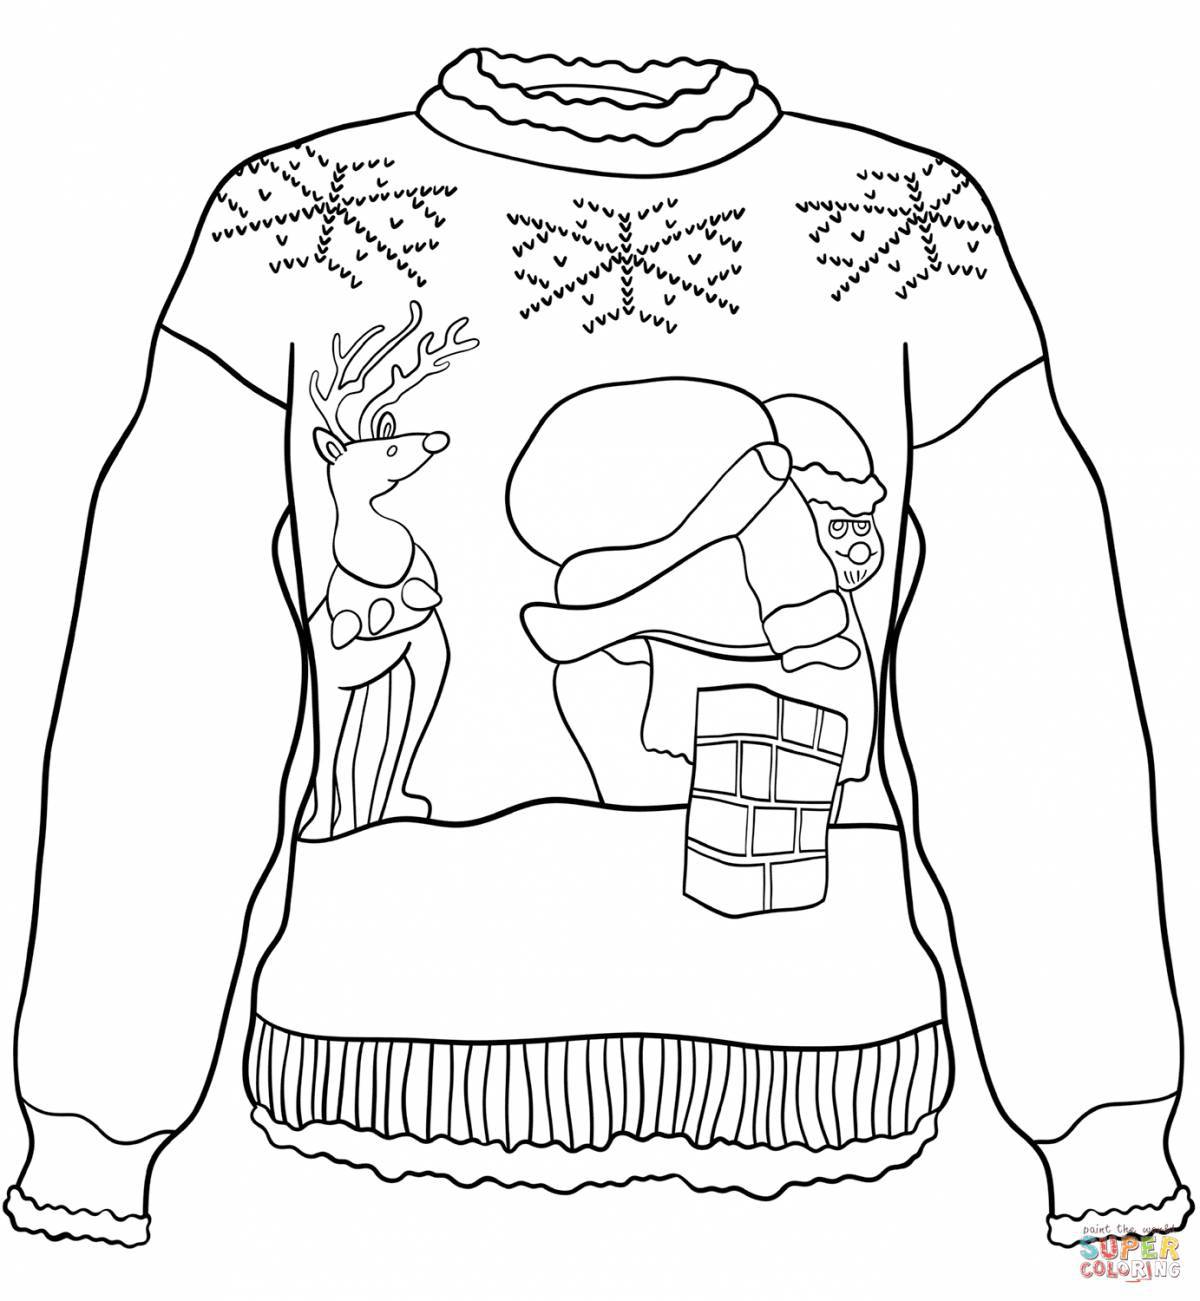 Colourful sweater coloring page